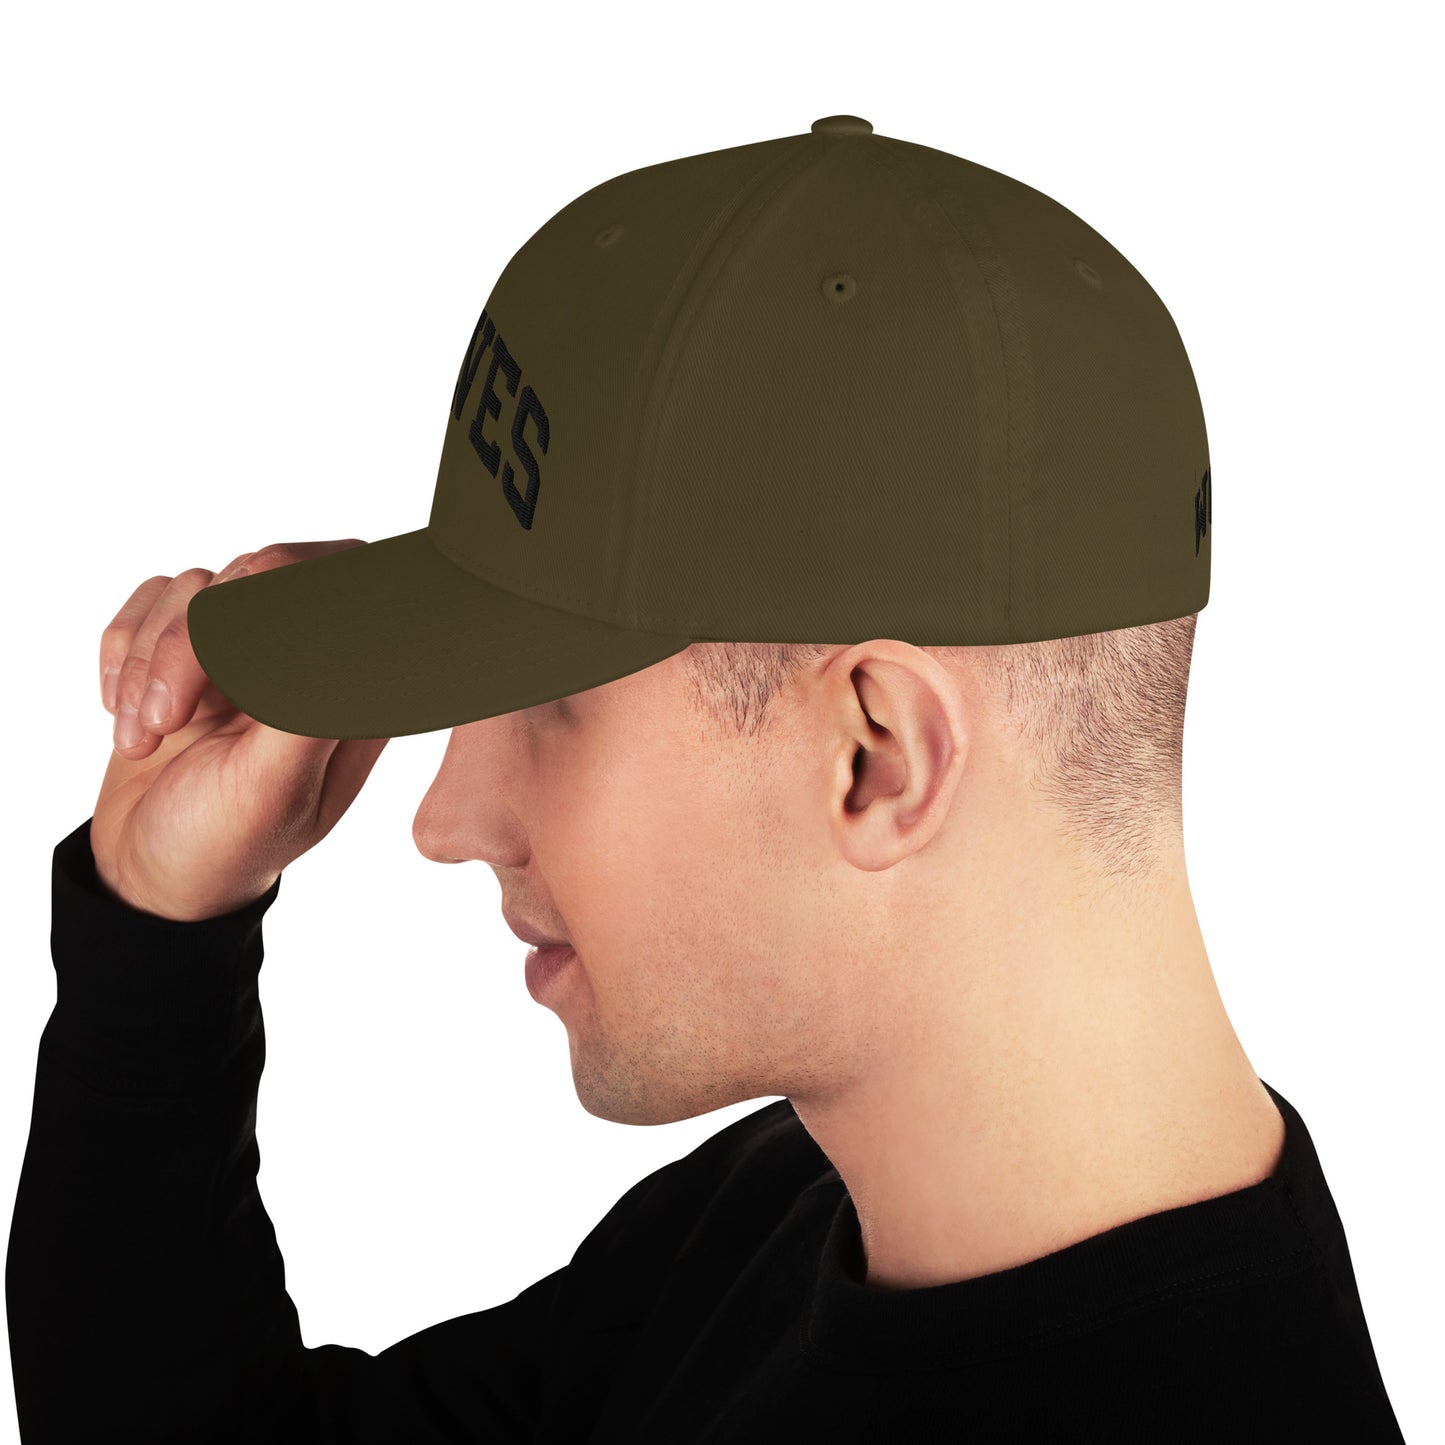 Wolves Industries HBG Structured Twill Cap